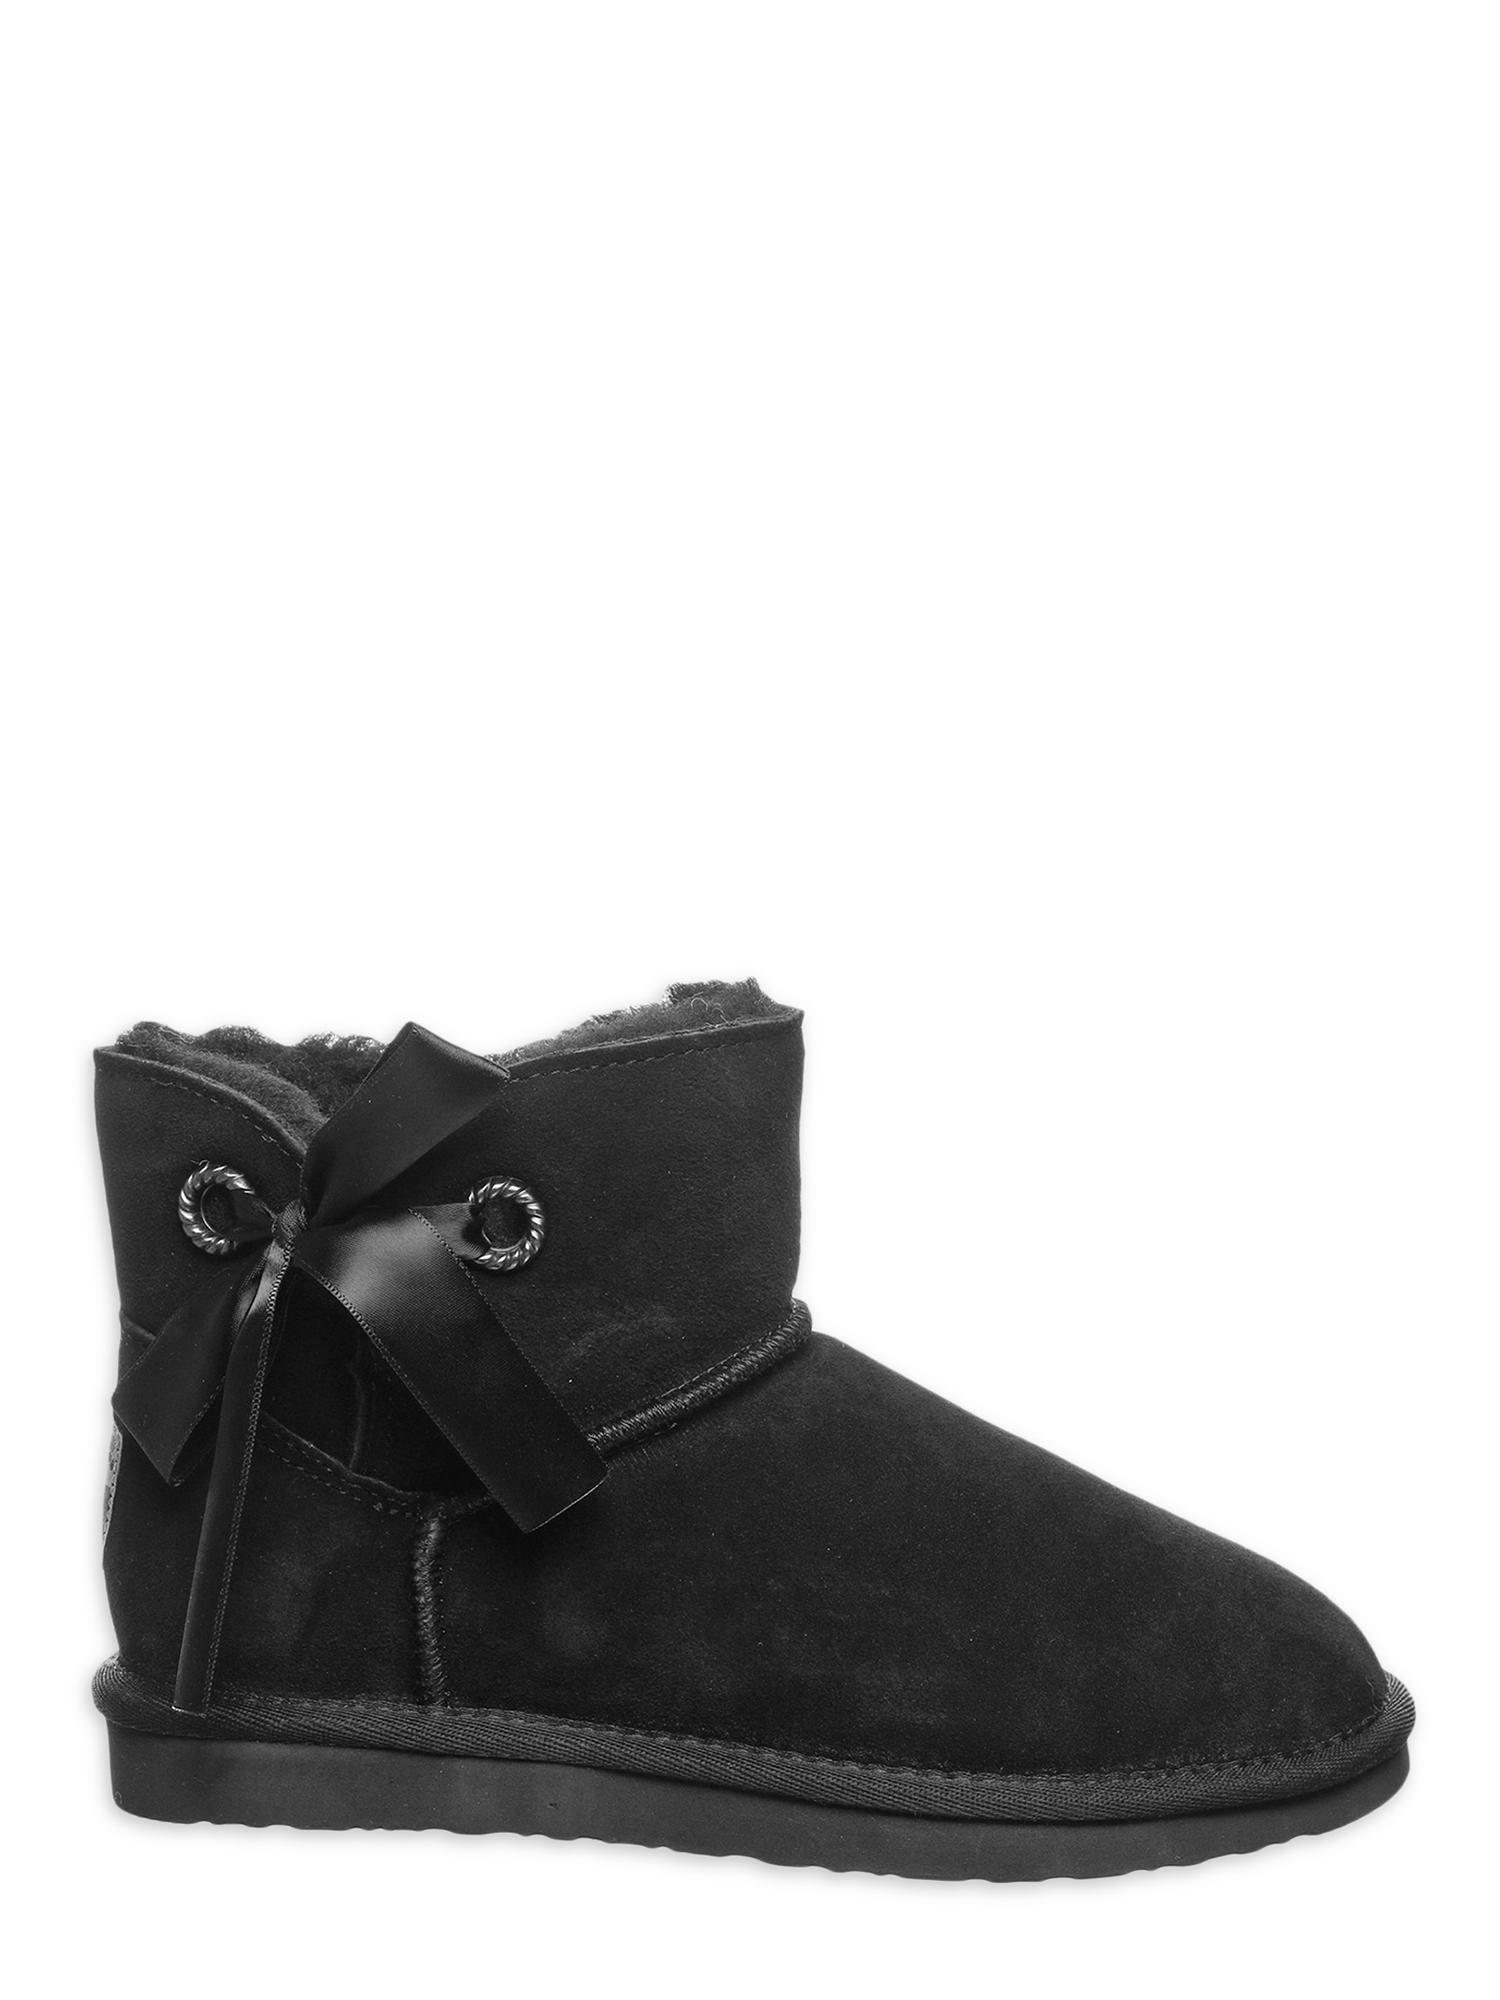 Pawz by Bearpaw Womens Journey Faux Fur Lined Suede Ankle Bow Bootie - image 4 of 5